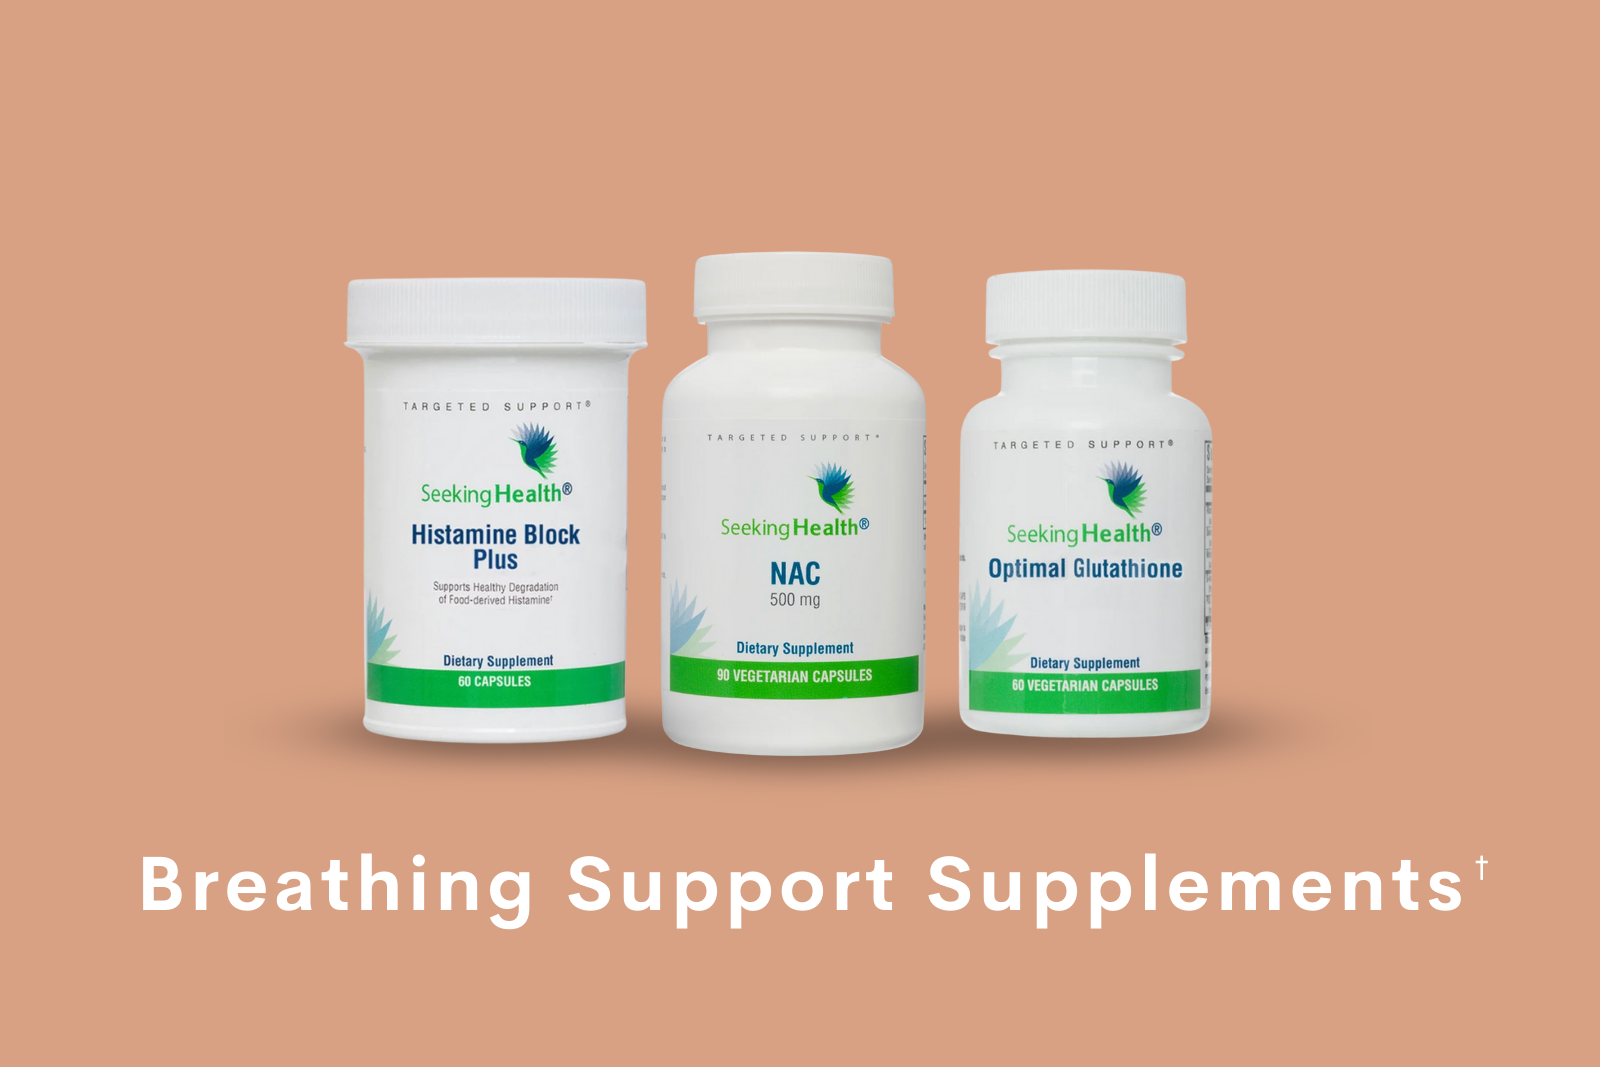 7 Supplements to Support Healthy Breathing